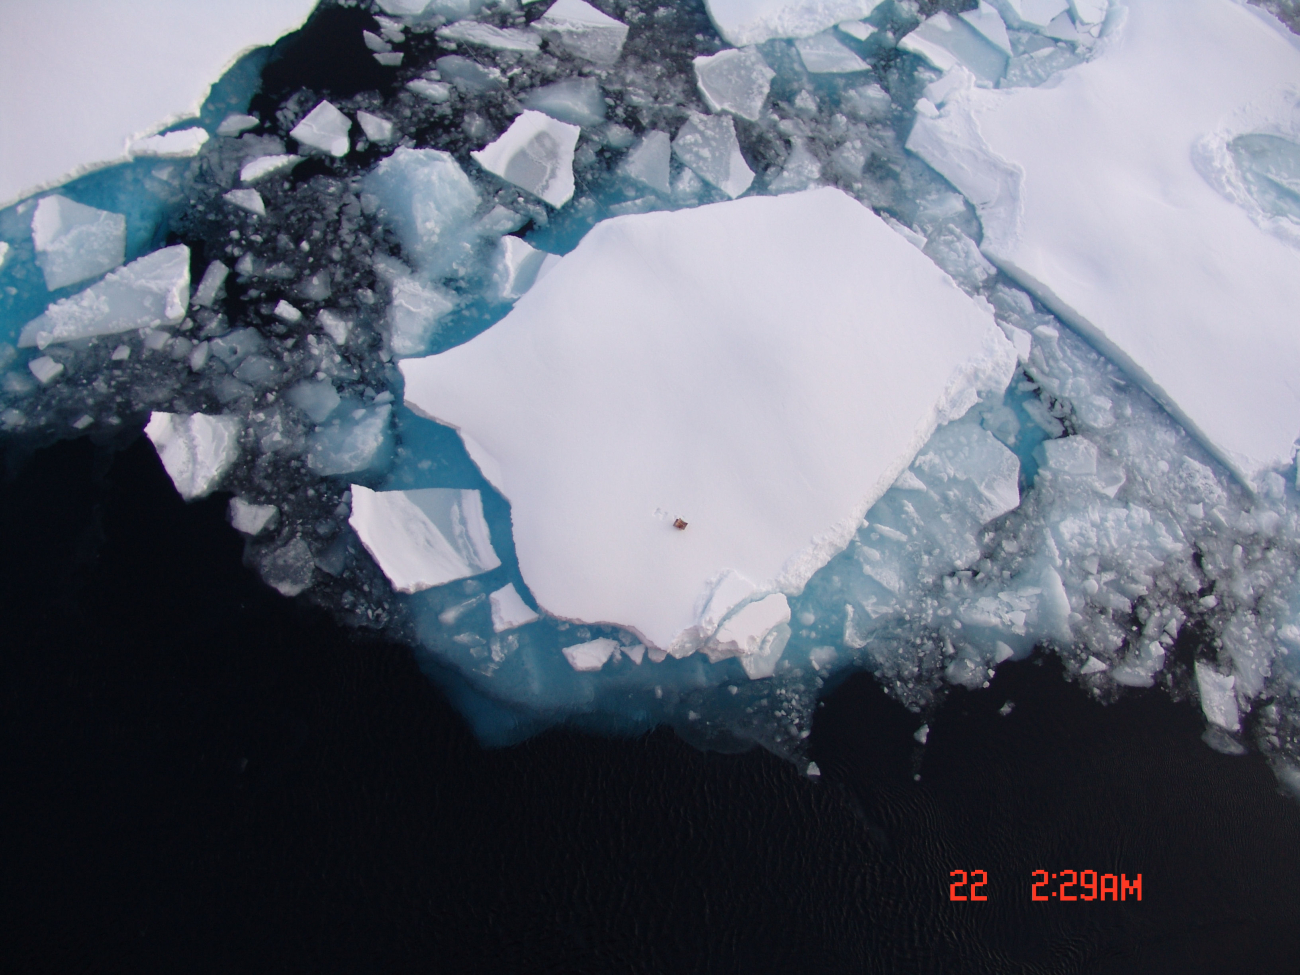 Small floe surrounded by brash ice with box on floe for scale